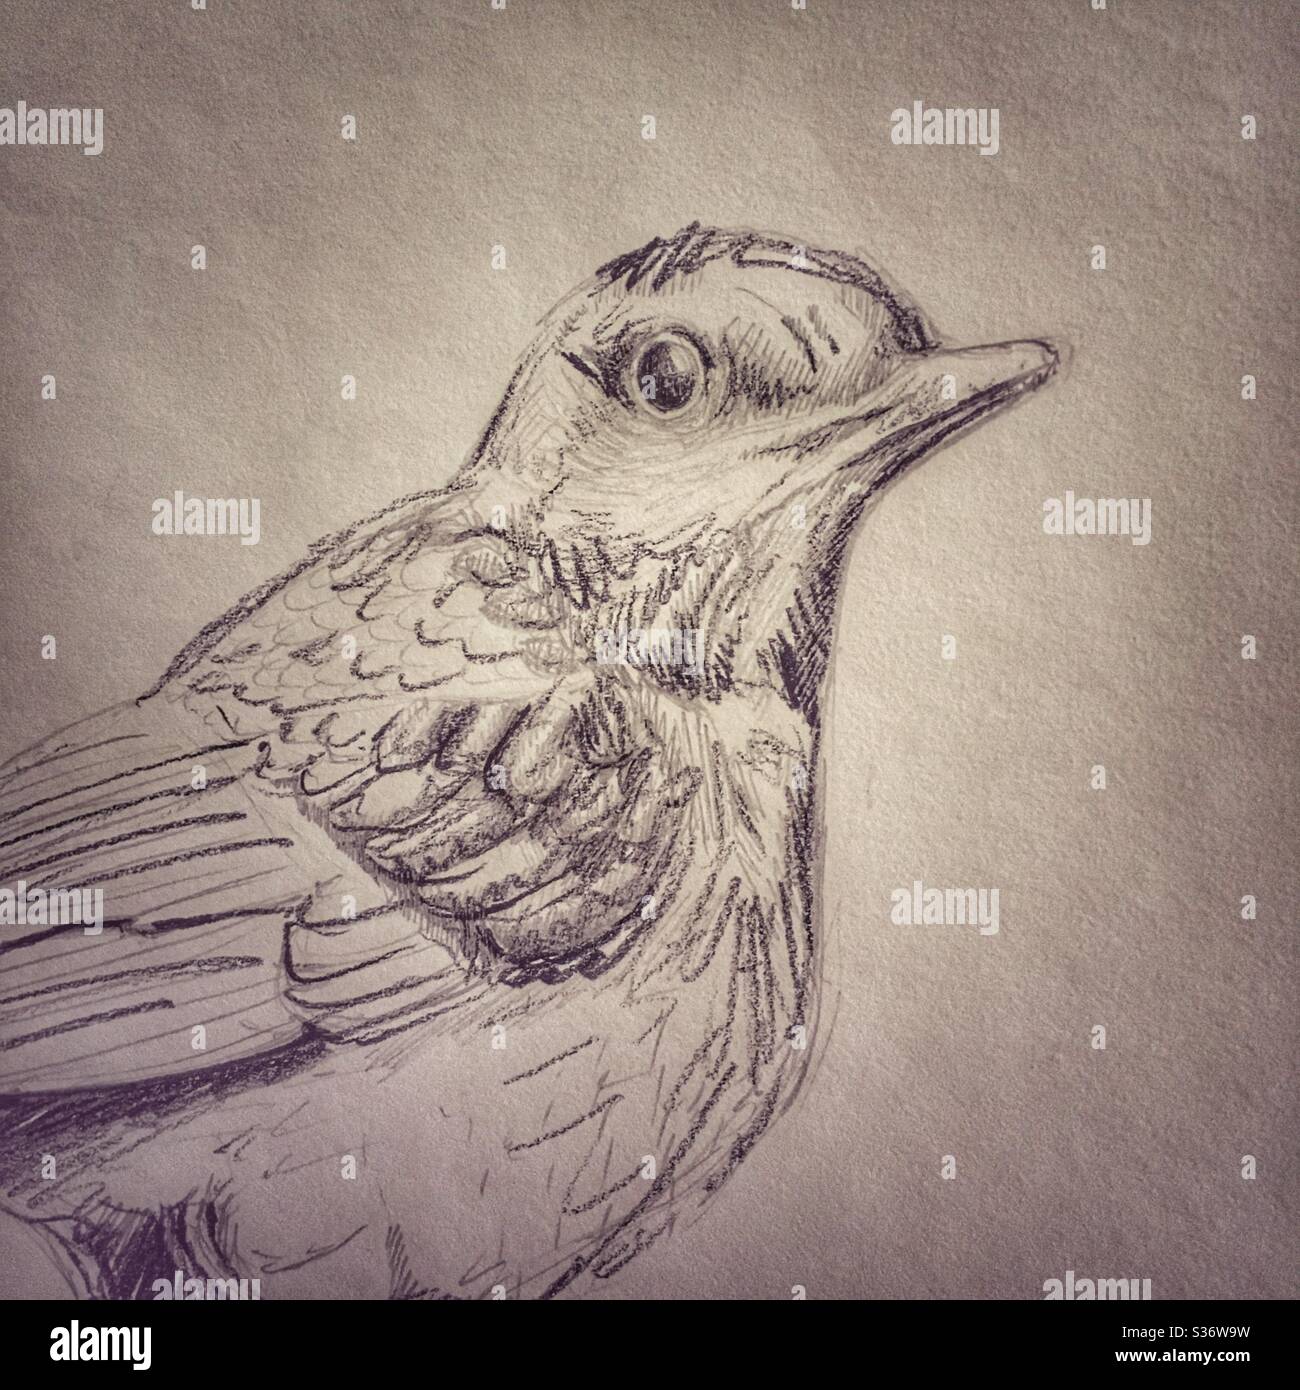 A photograph of a black and white pencil drawing illustration of a bird drawn from life. Stock Photo